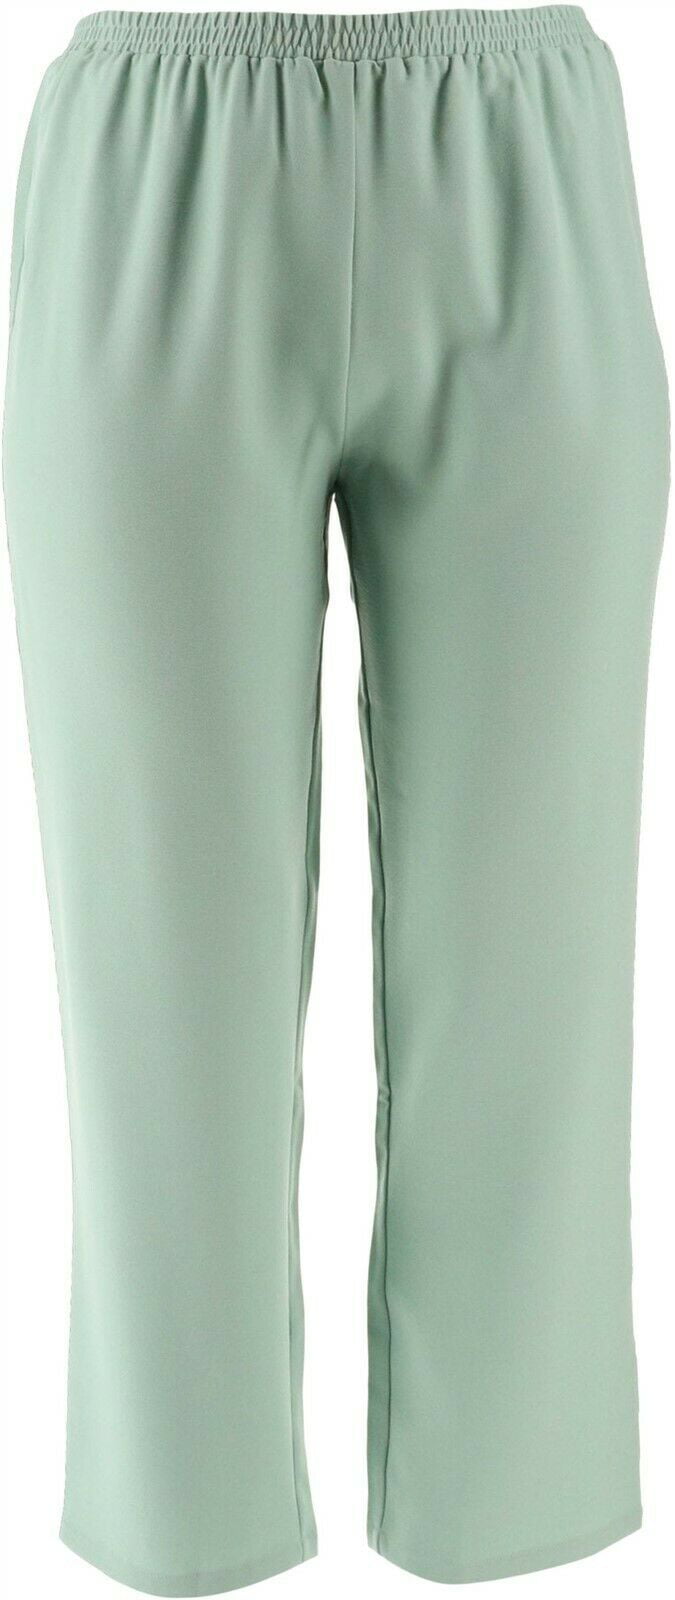 Bob Mackie Woven Crepe Pull-On Pants Rose M NEW A303006